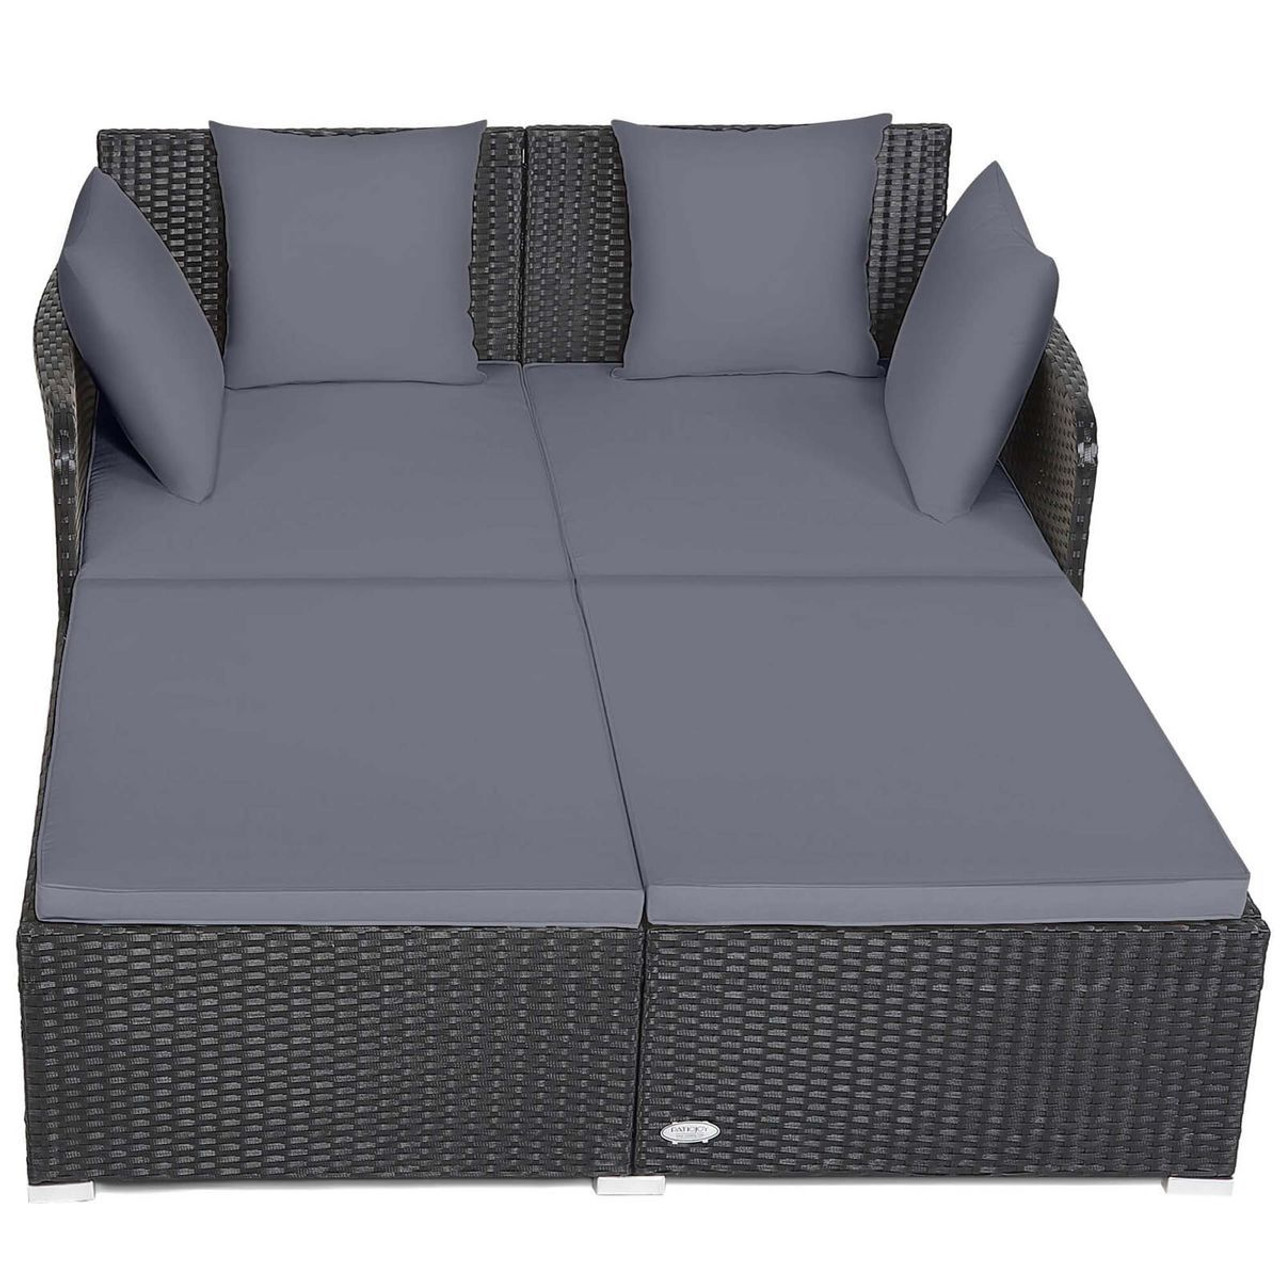 Cushioned Outdoor Patio Rattan Daybed product image